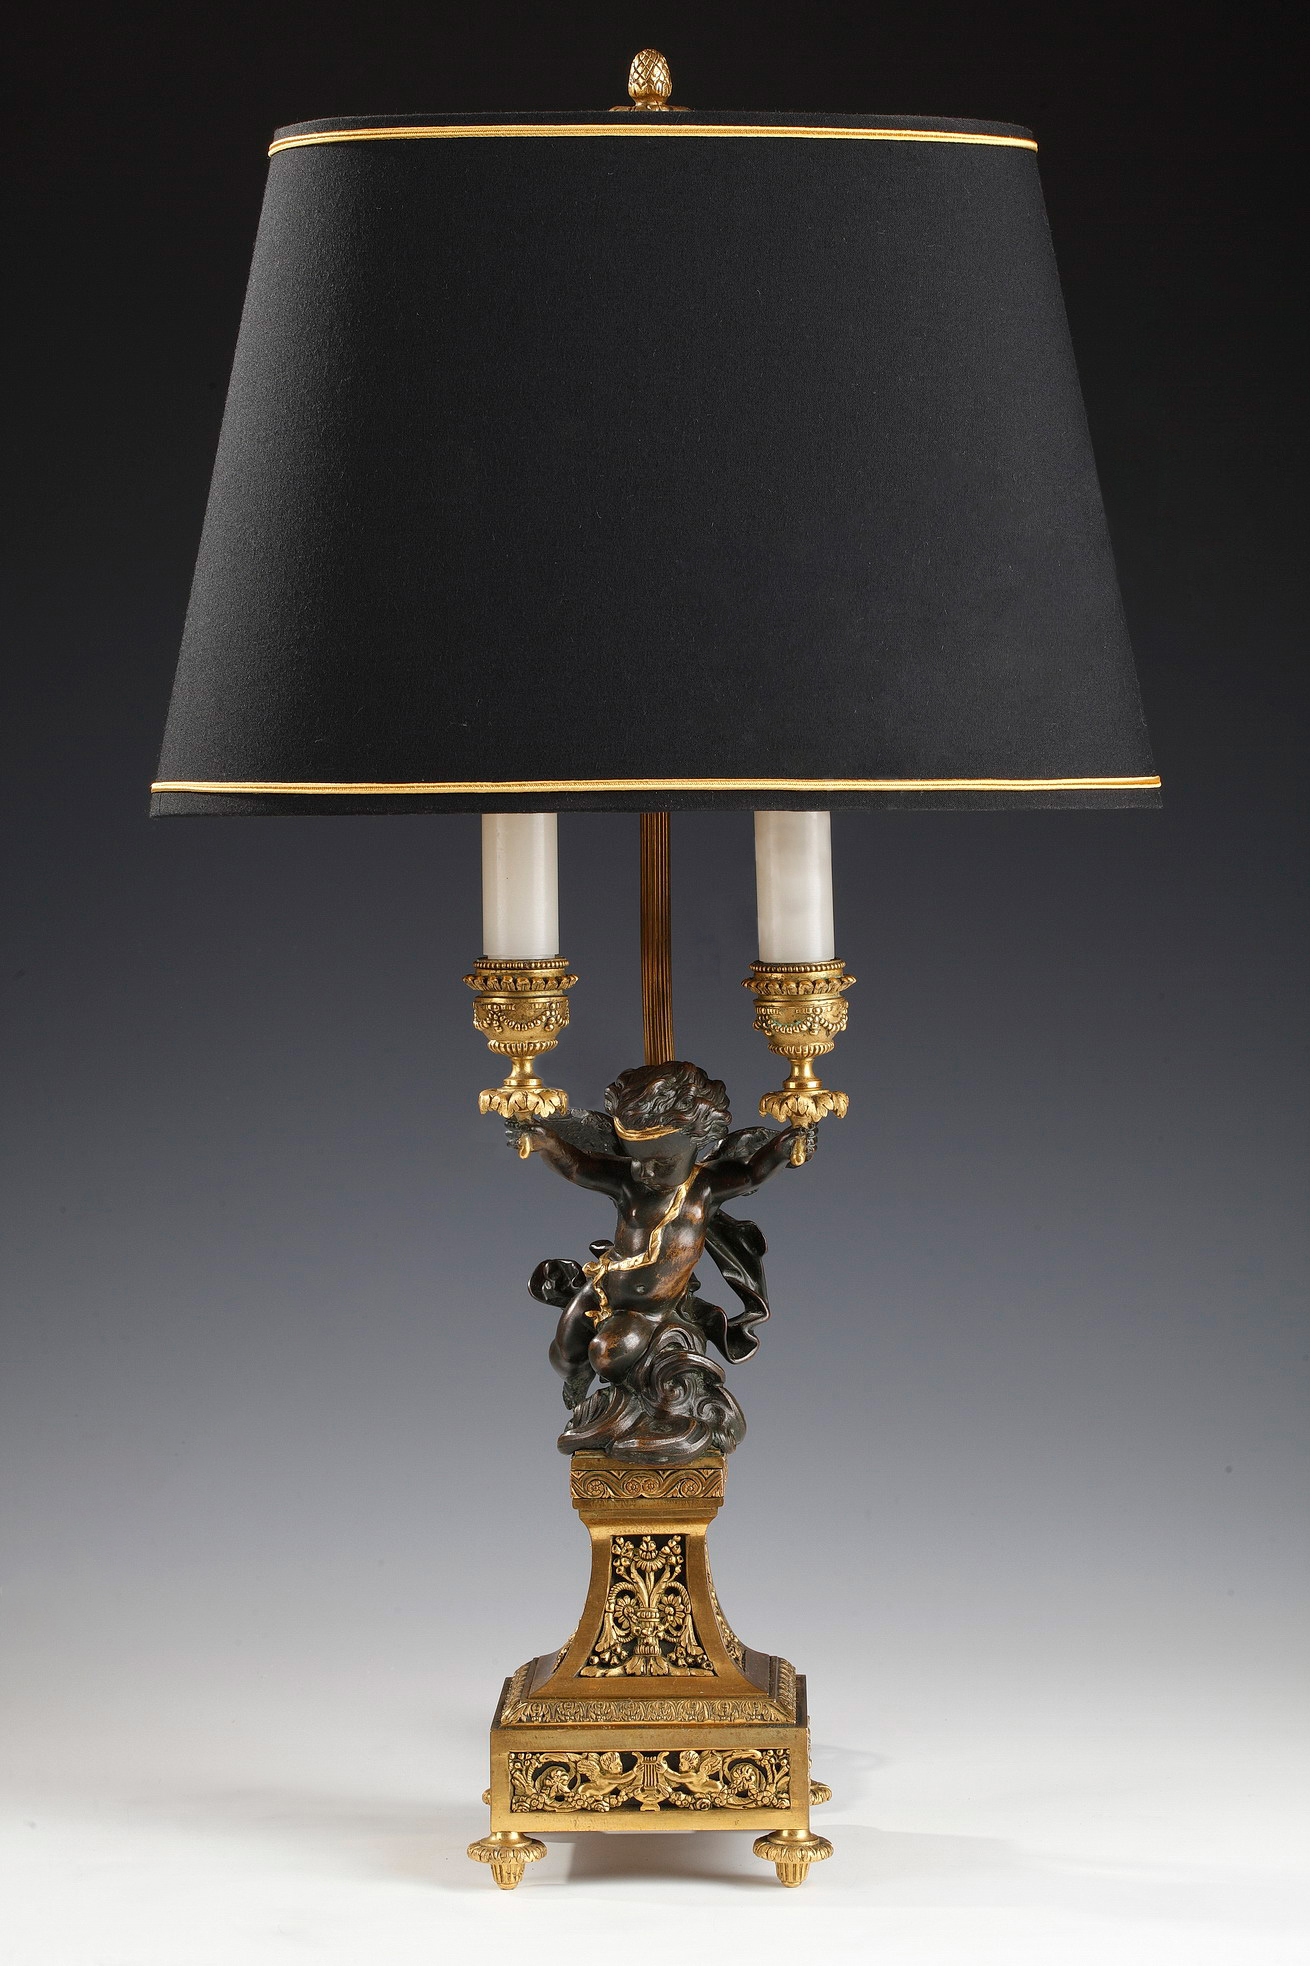 French, Neoclassical style lamp